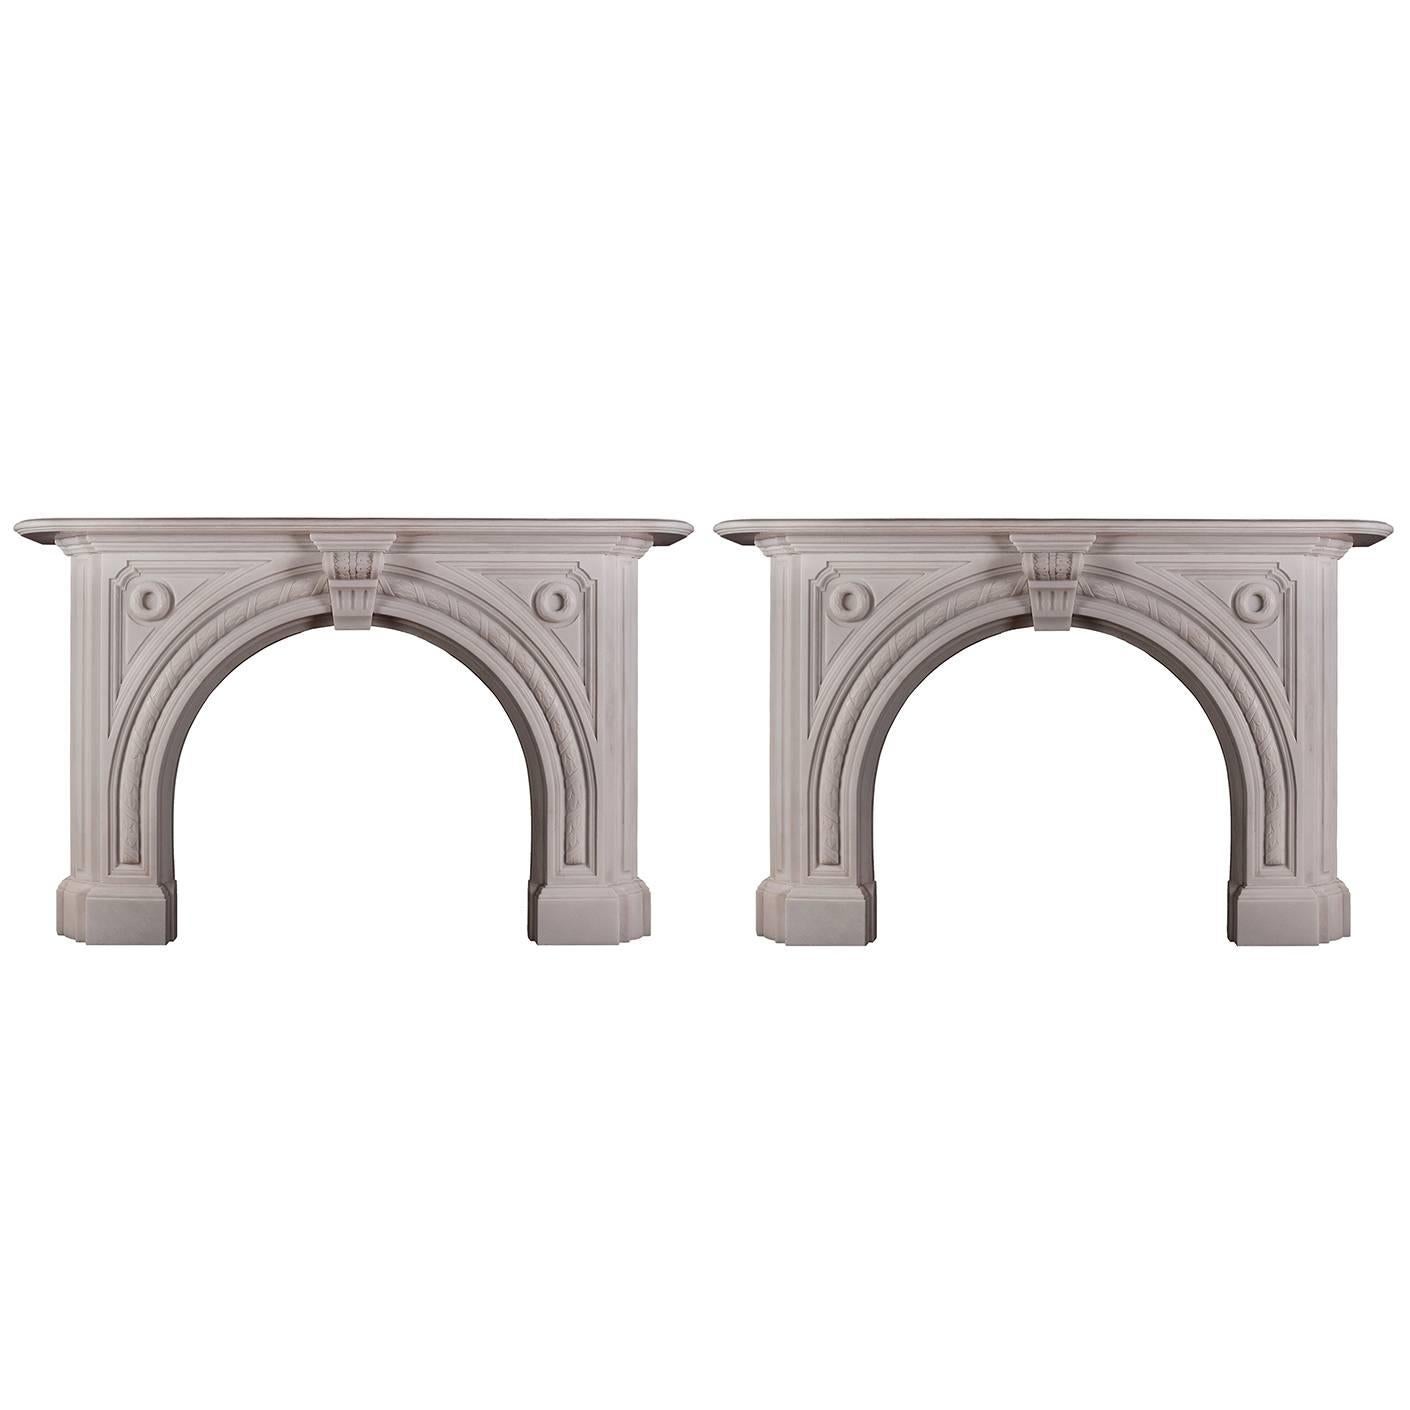 A pair of Victorian fireplace mantels in white marble